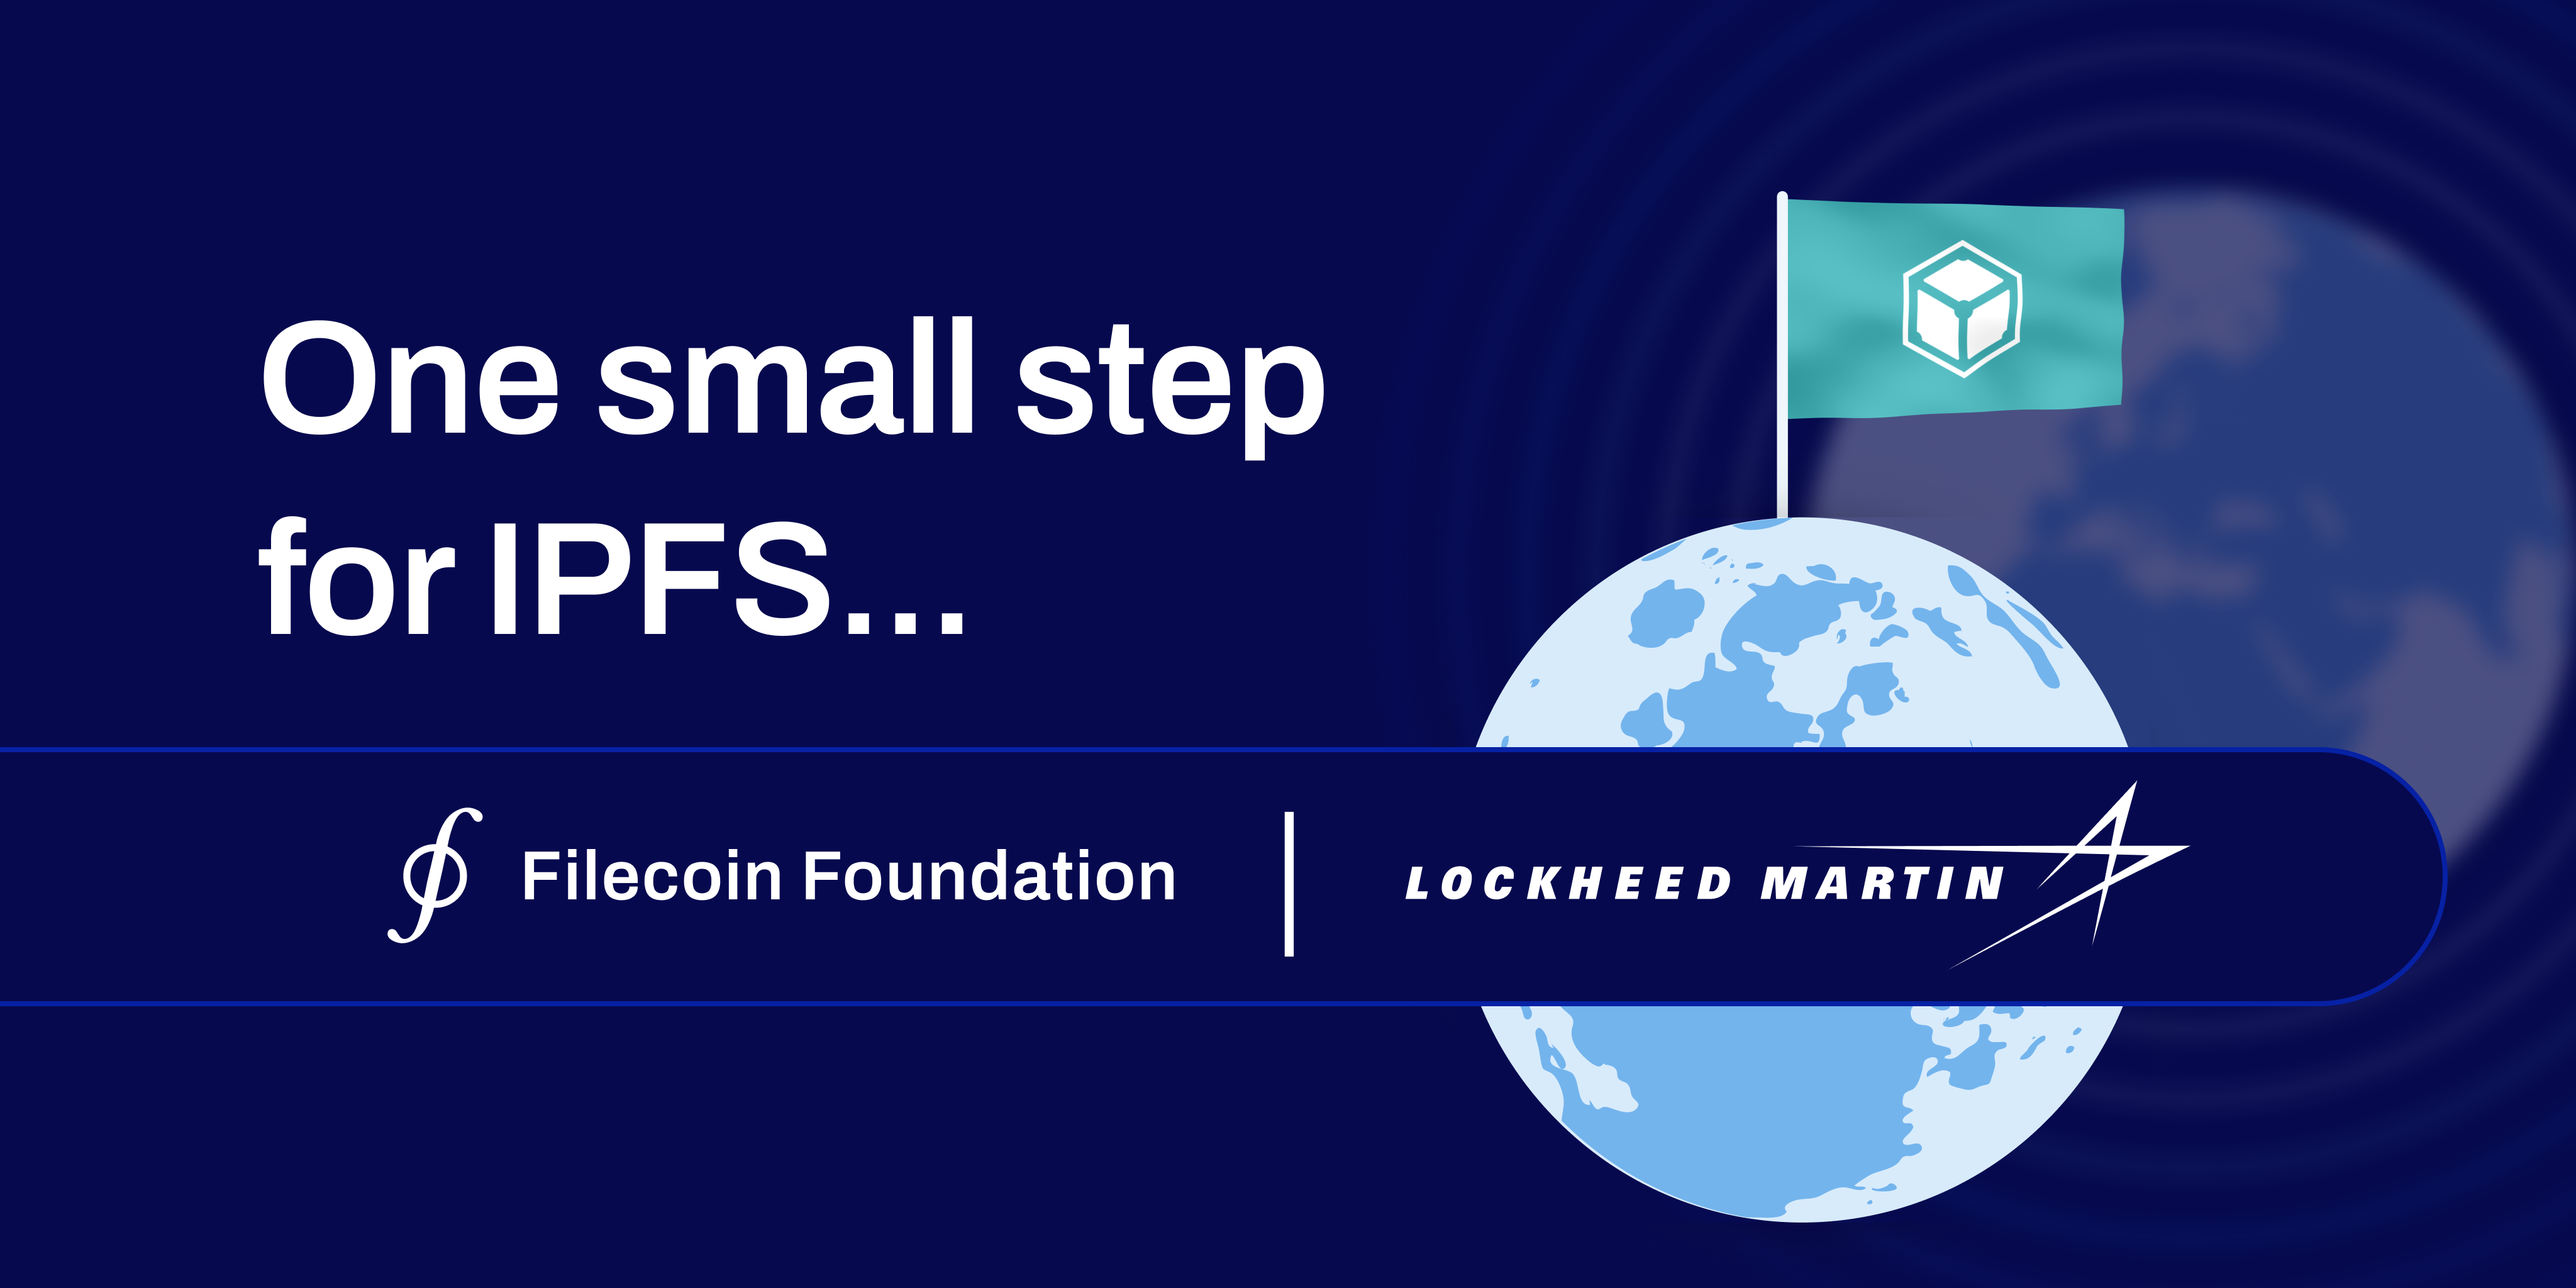 Video for Lockheed Martin and Filecoin Foundation.